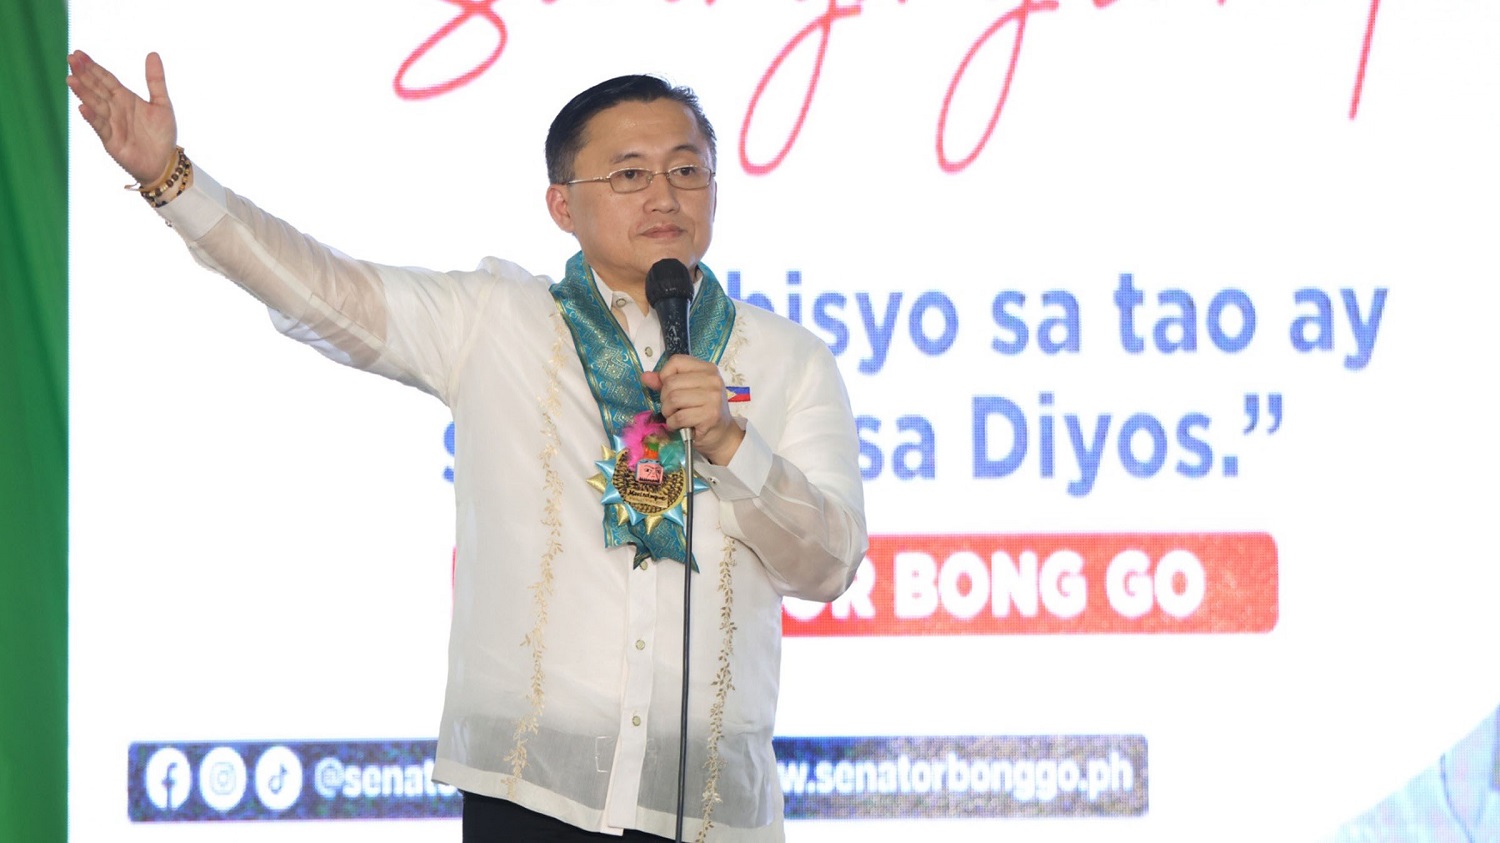 Super Health Centers to open in Marinduque